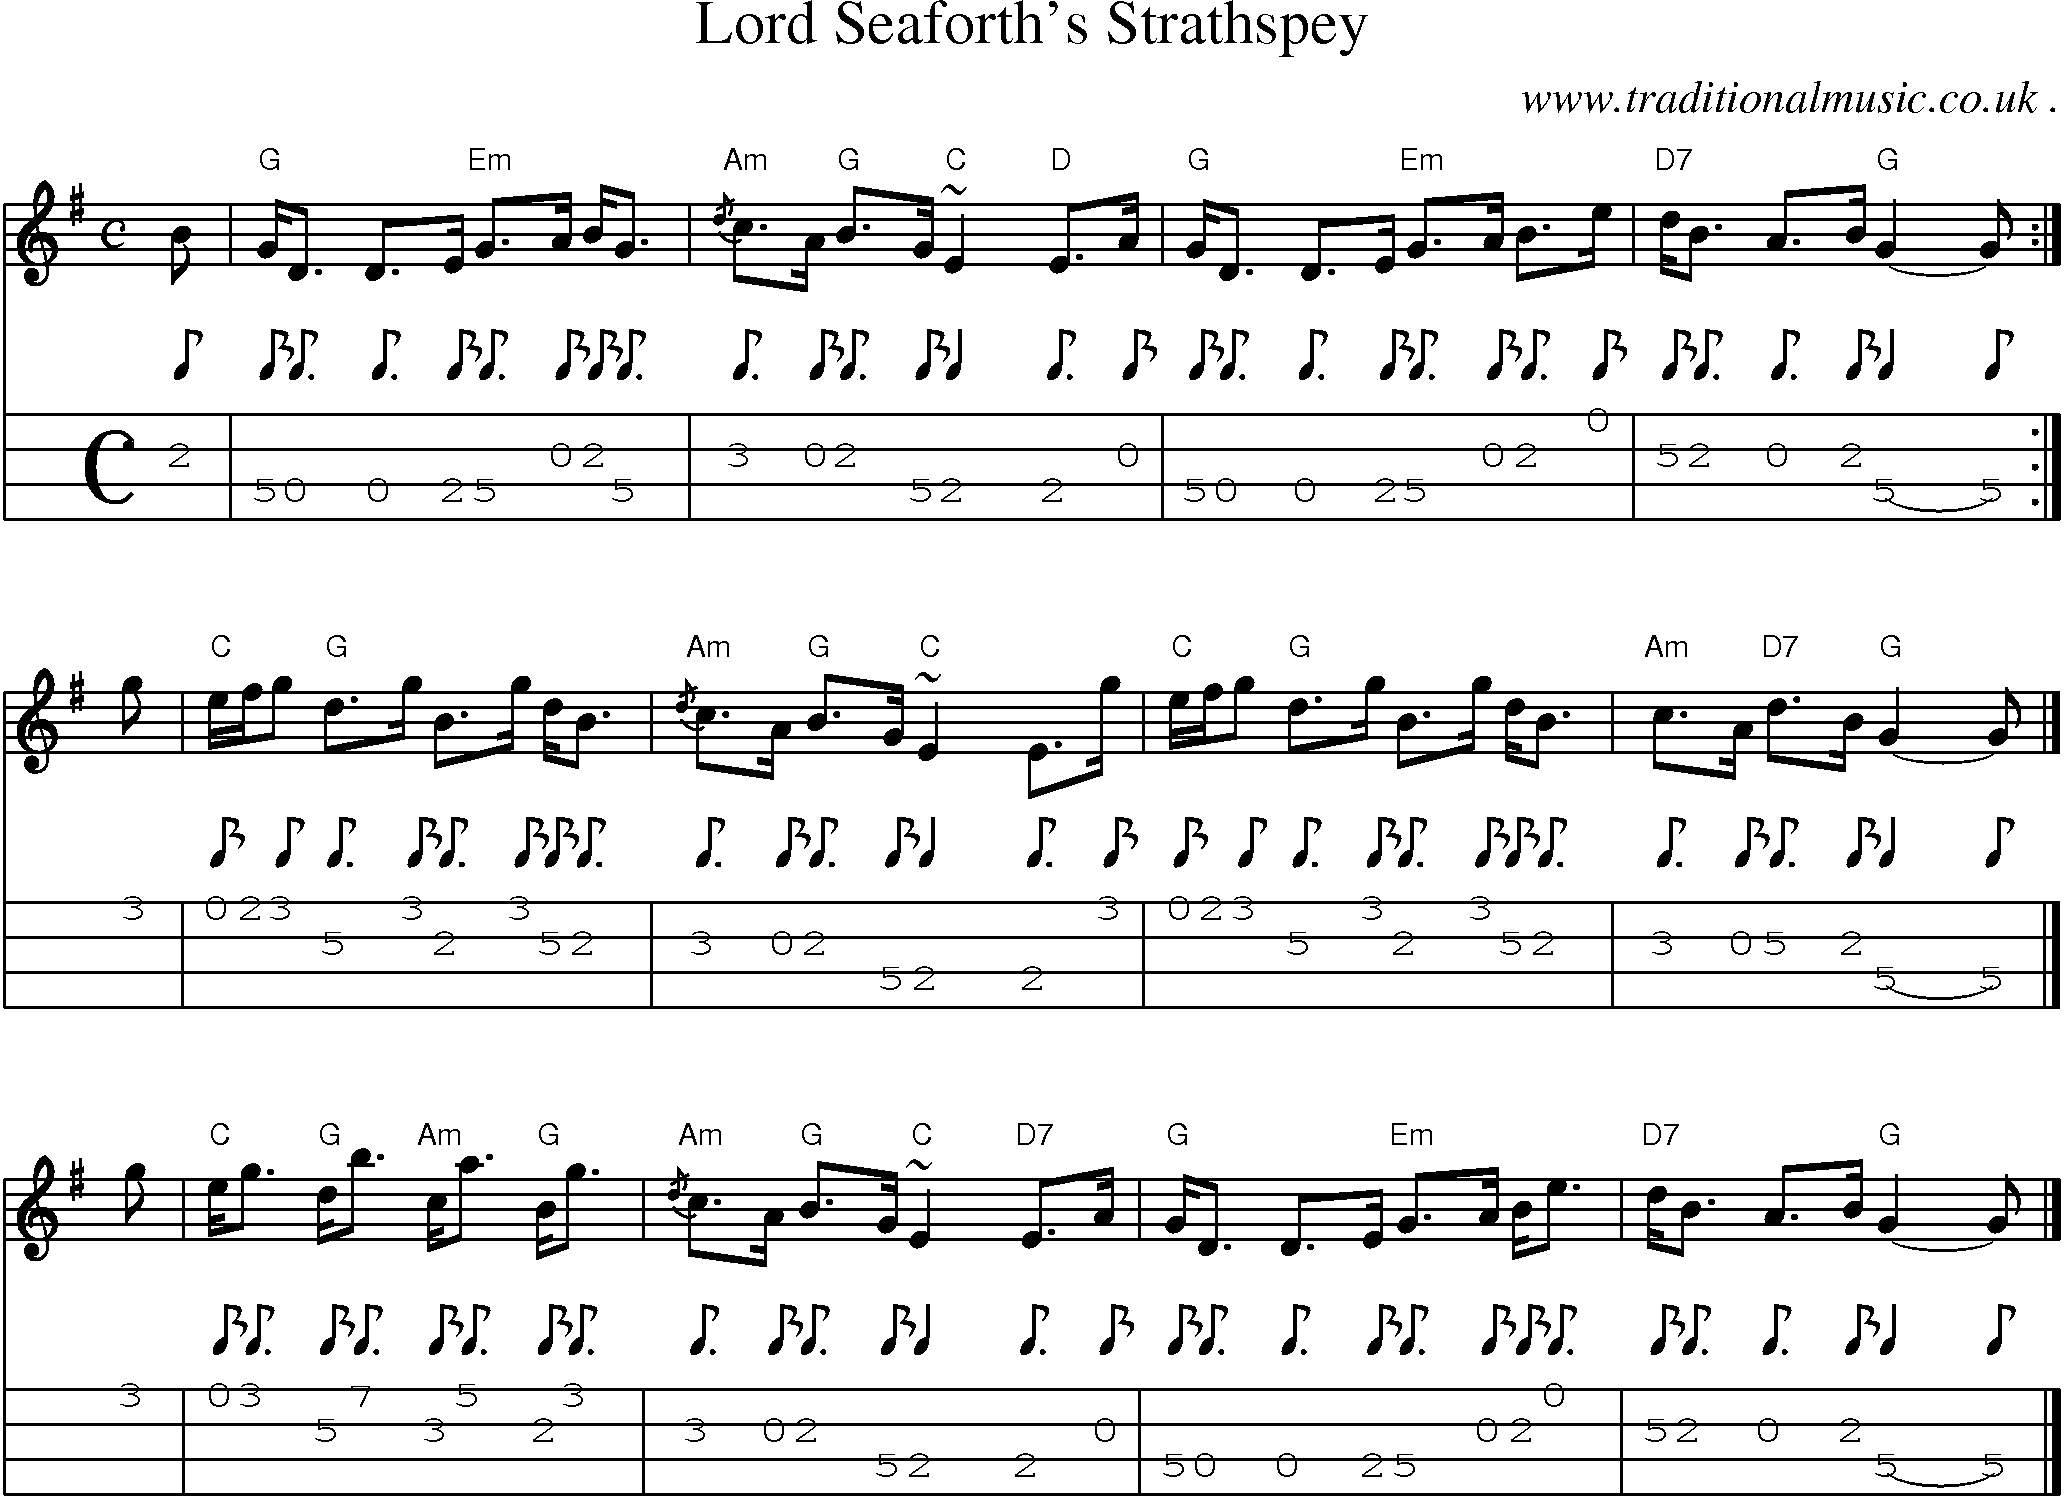 Sheet-music  score, Chords and Mandolin Tabs for Lord Seaforths Strathspey